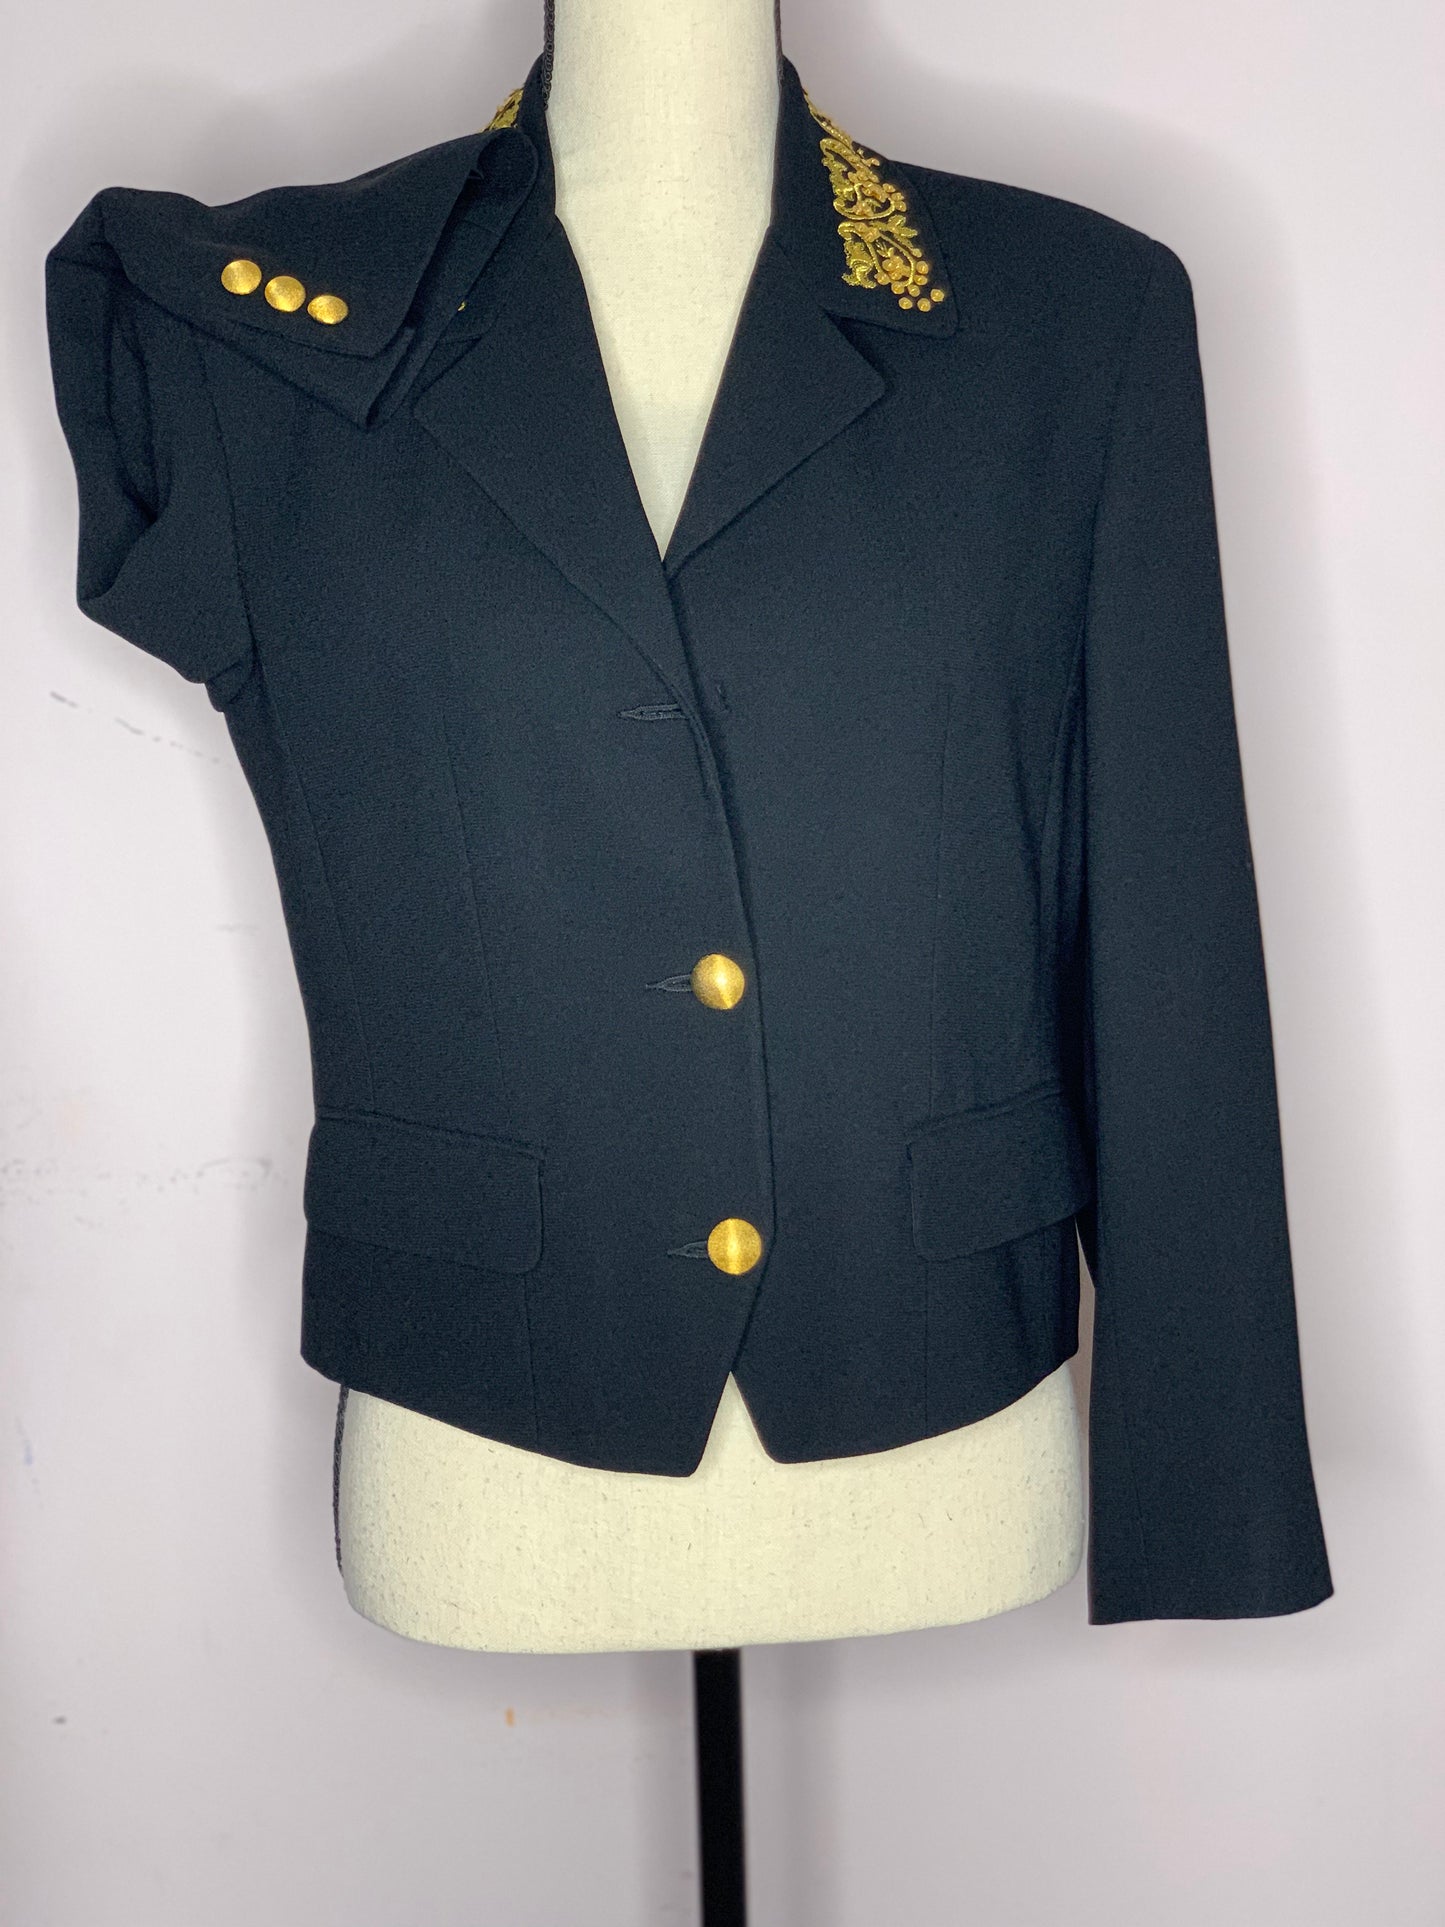 Black Long Sleeve Blazer with Gold Accent Collar and Buttons